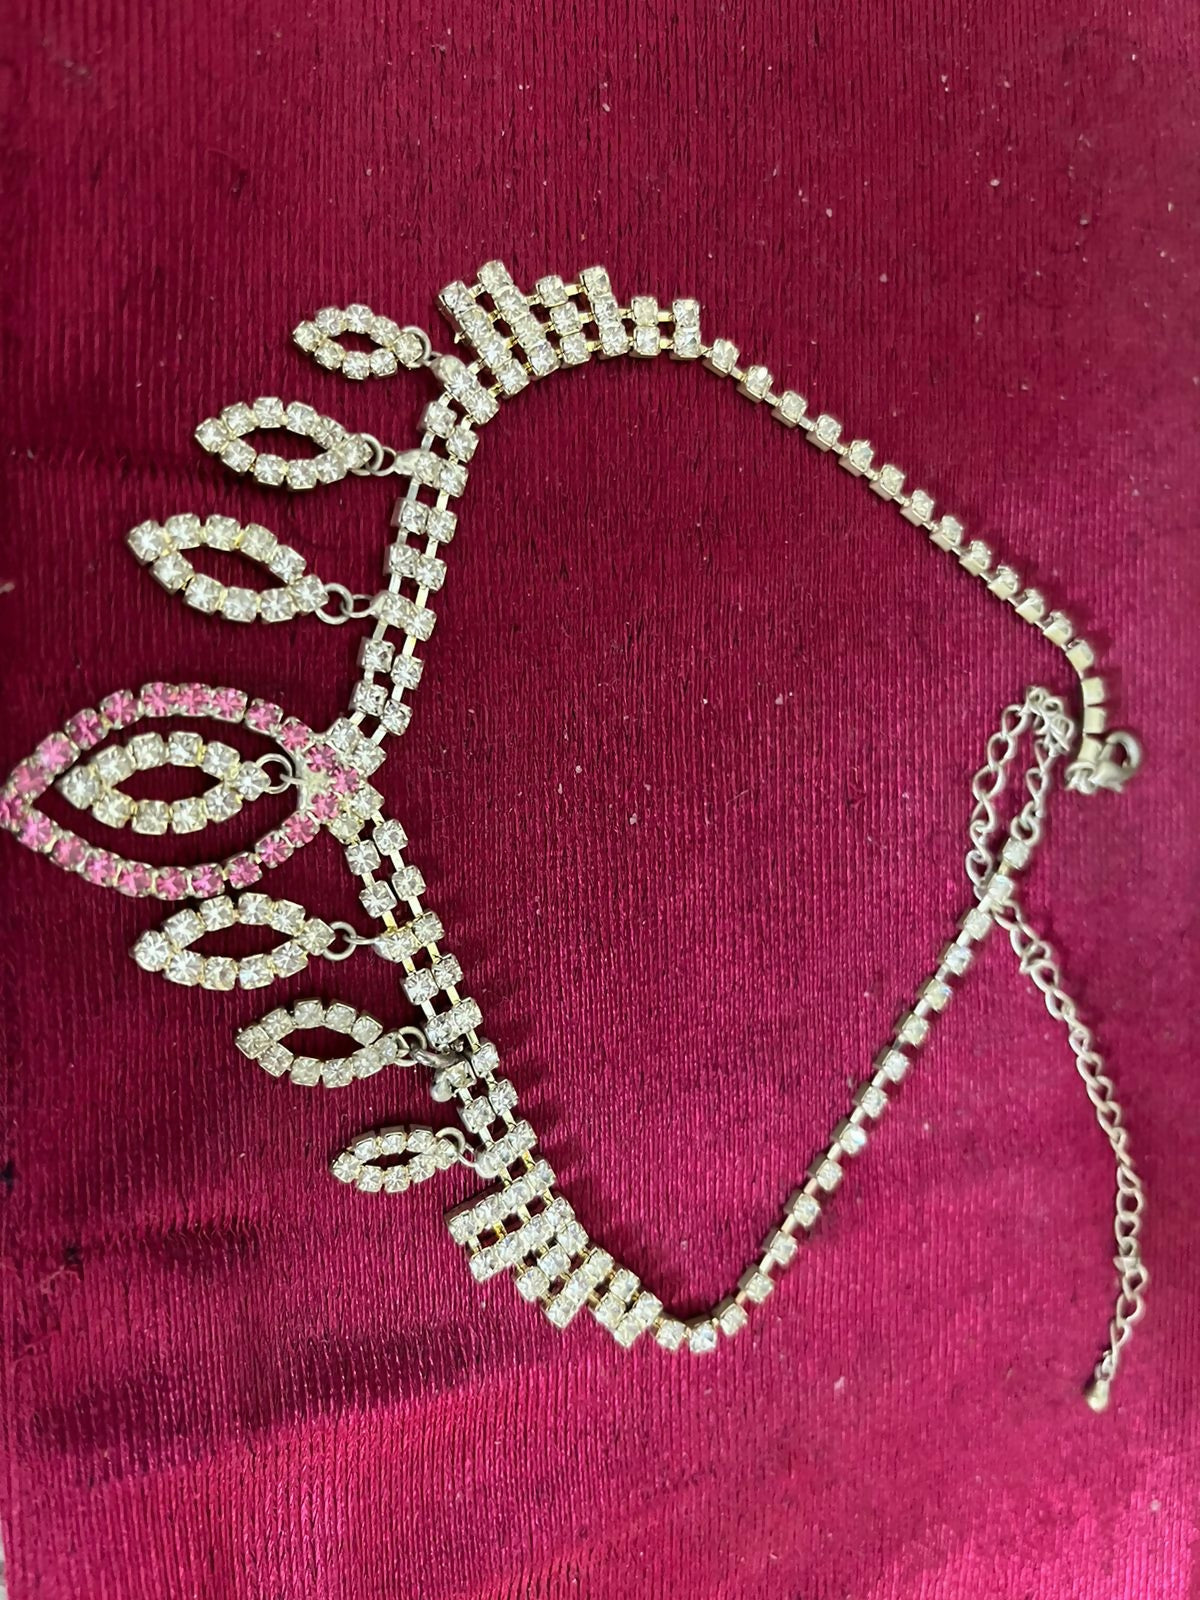 Imported from Saudia | Elegant Silver Necklace Set | Women Jewellery | Worn Once